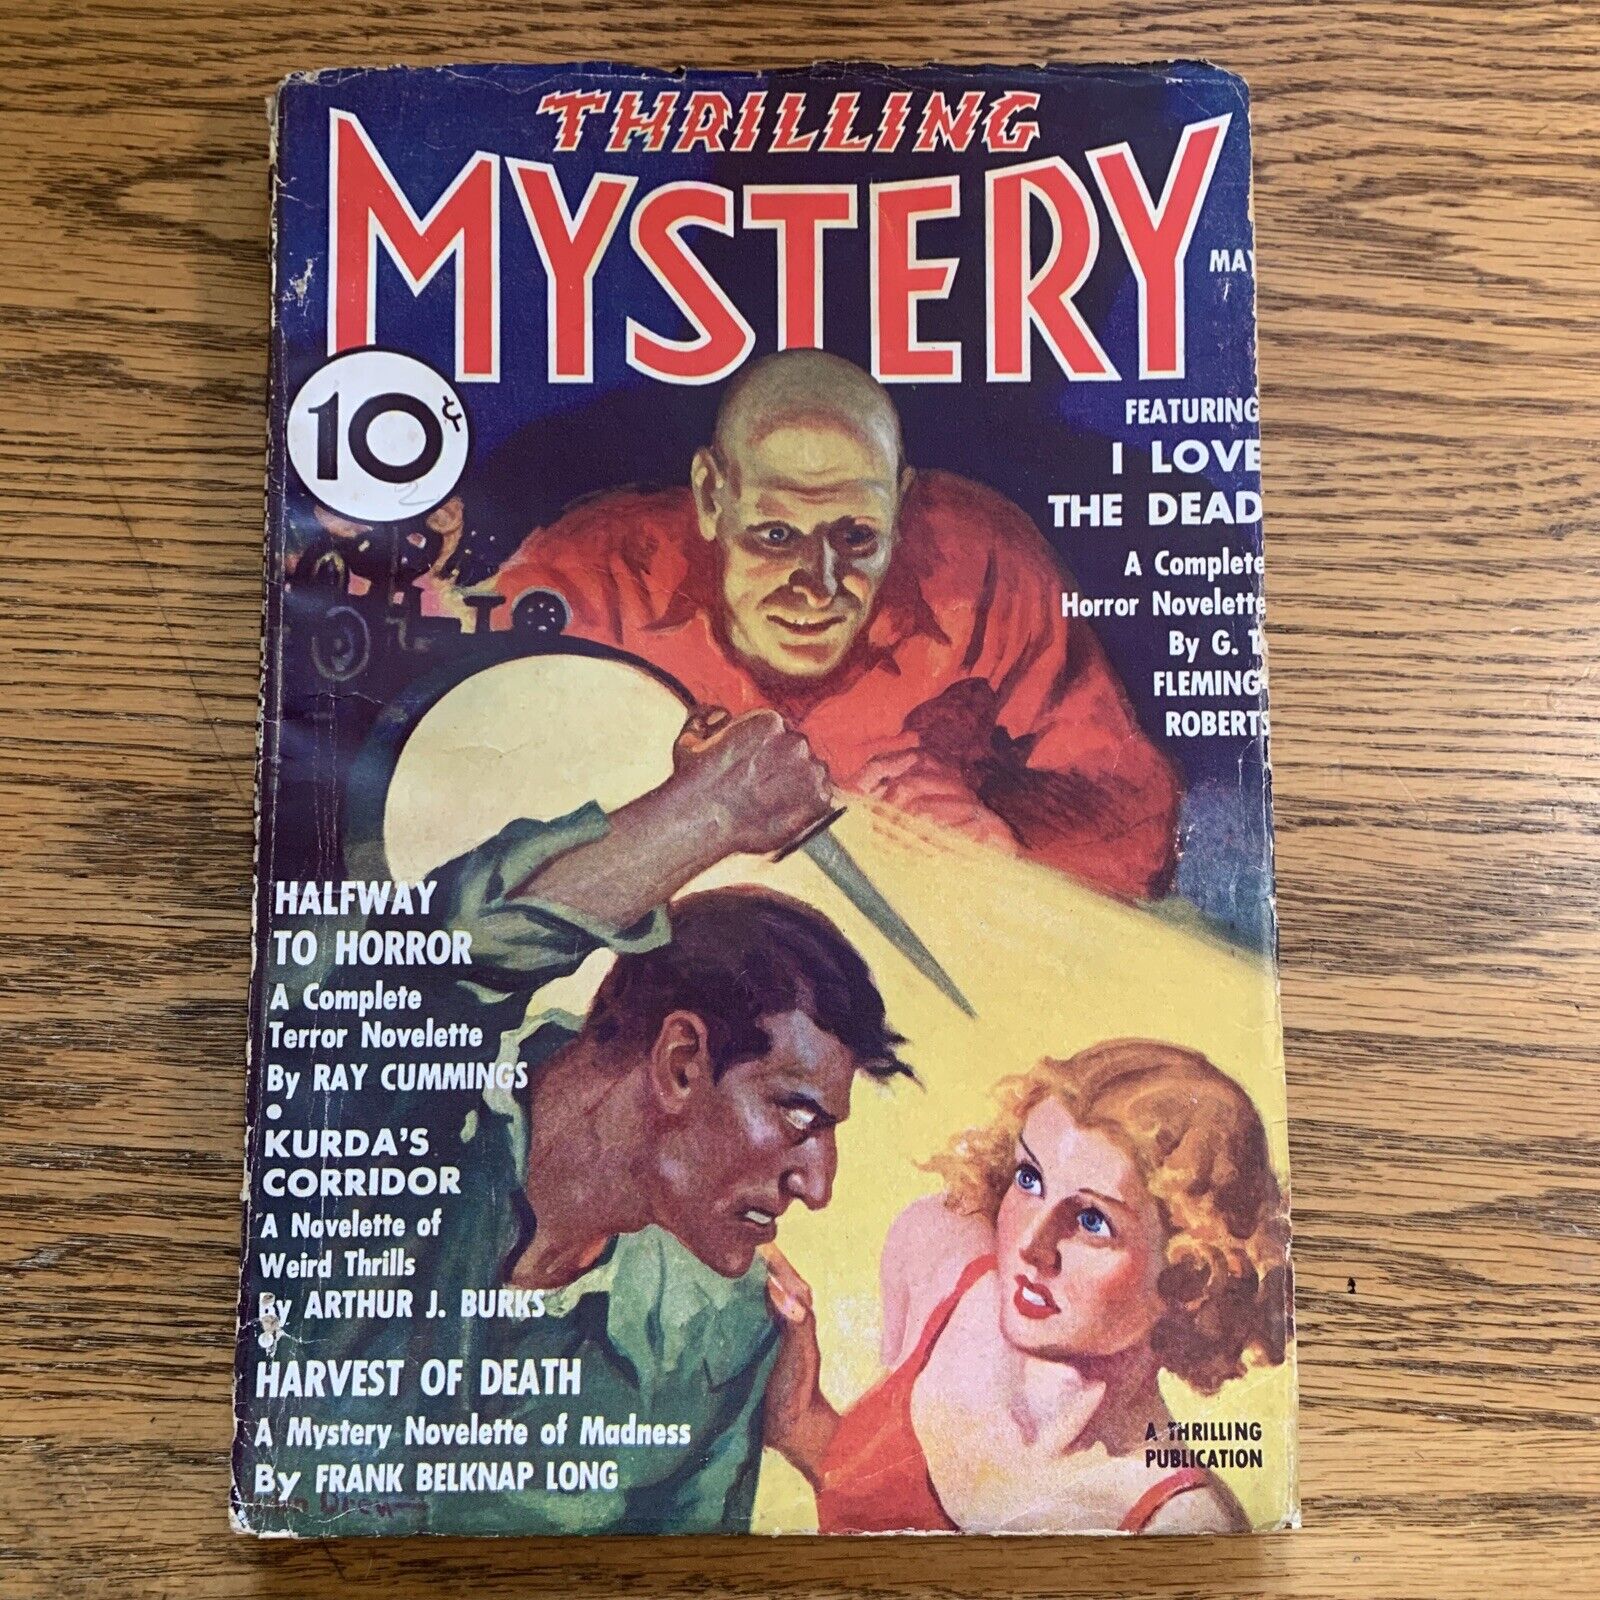 RARE May 1936 THRILLING MYSTERY PULP Classic Cover FN